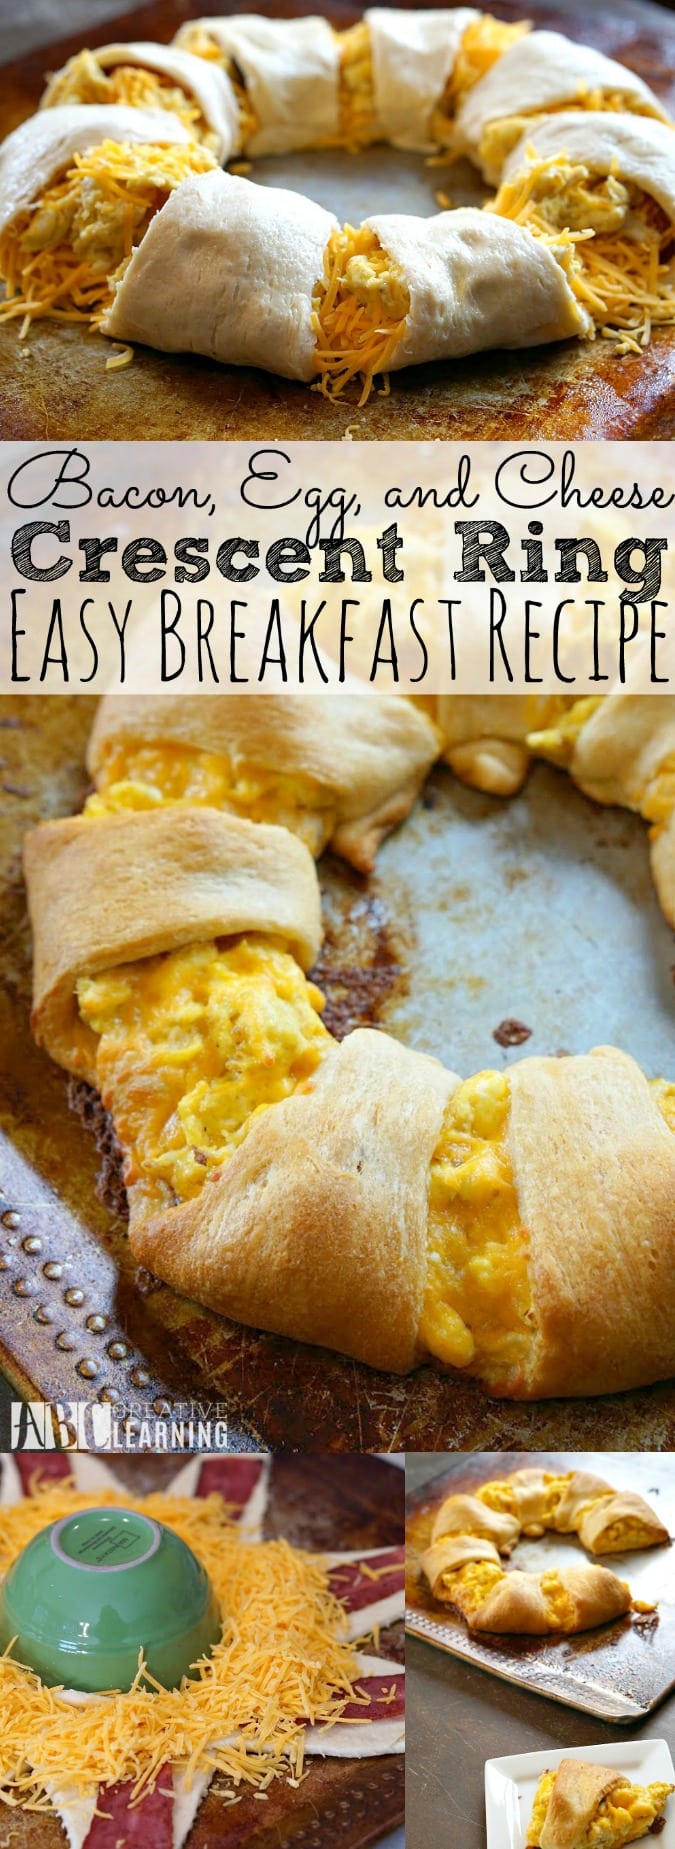 Bacon Egg and Cheese Crescent Ring Recipe